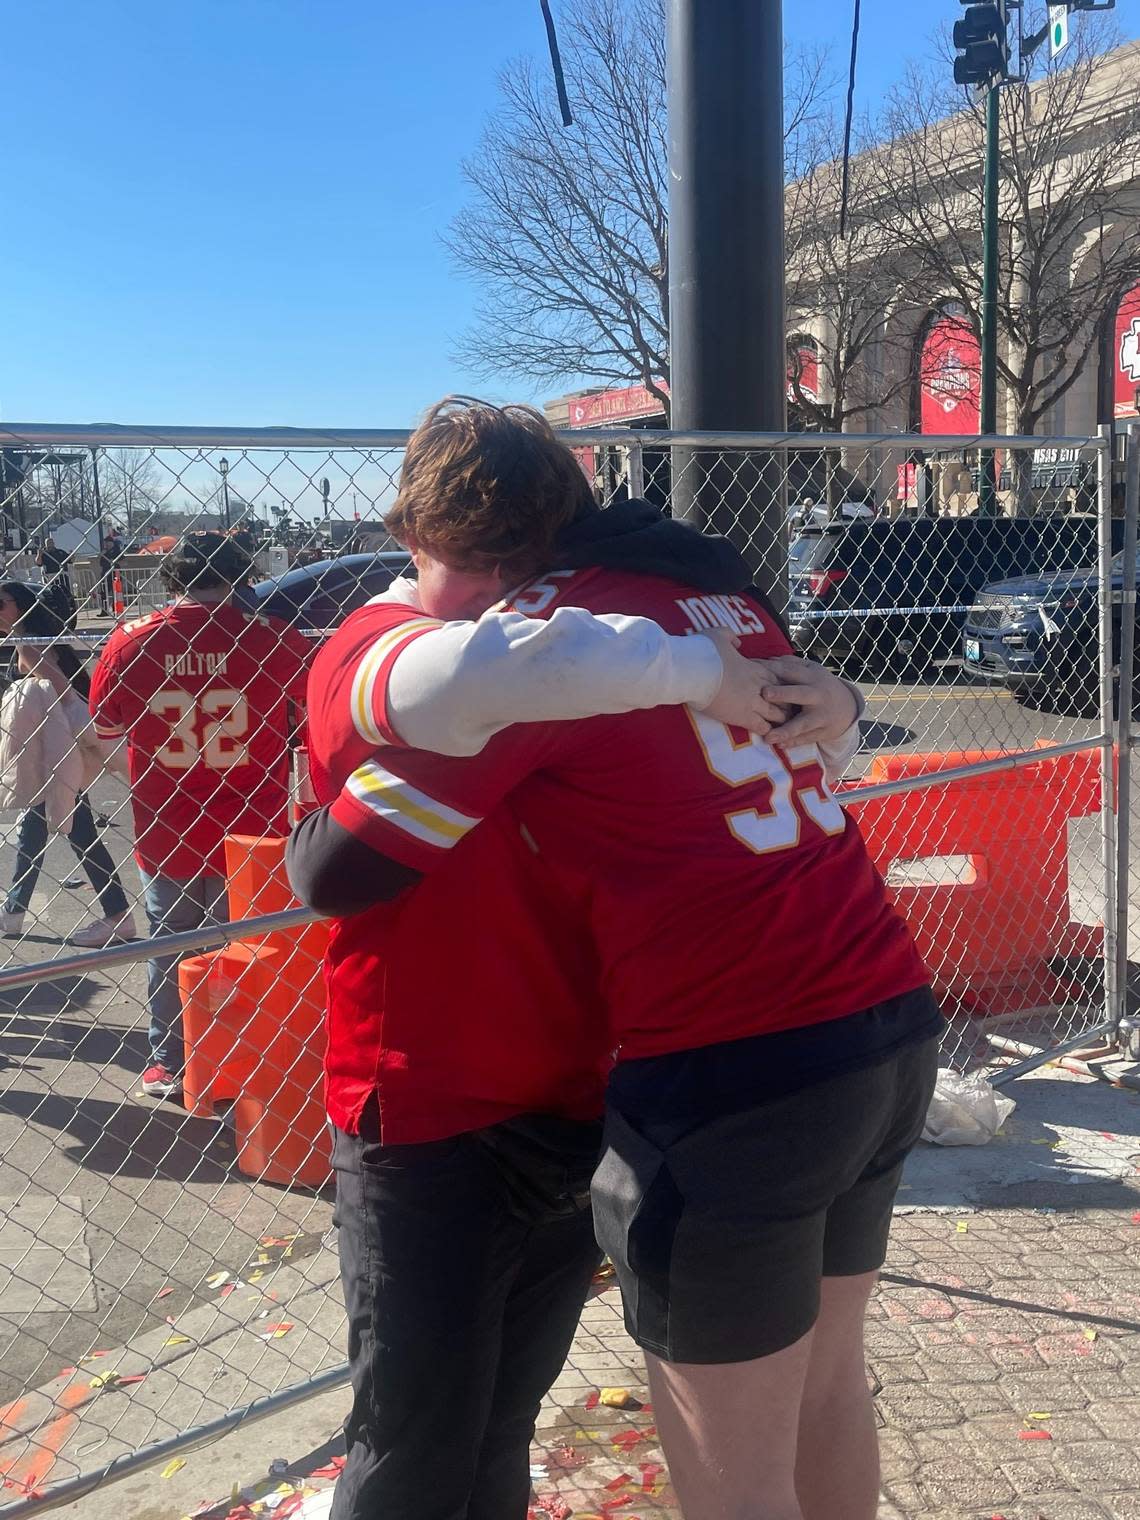 Hank Hunter, left, and Gabe Wallace embraced after reuniting following the shooting at the Kansas City Chiefs Super Bowl parade.